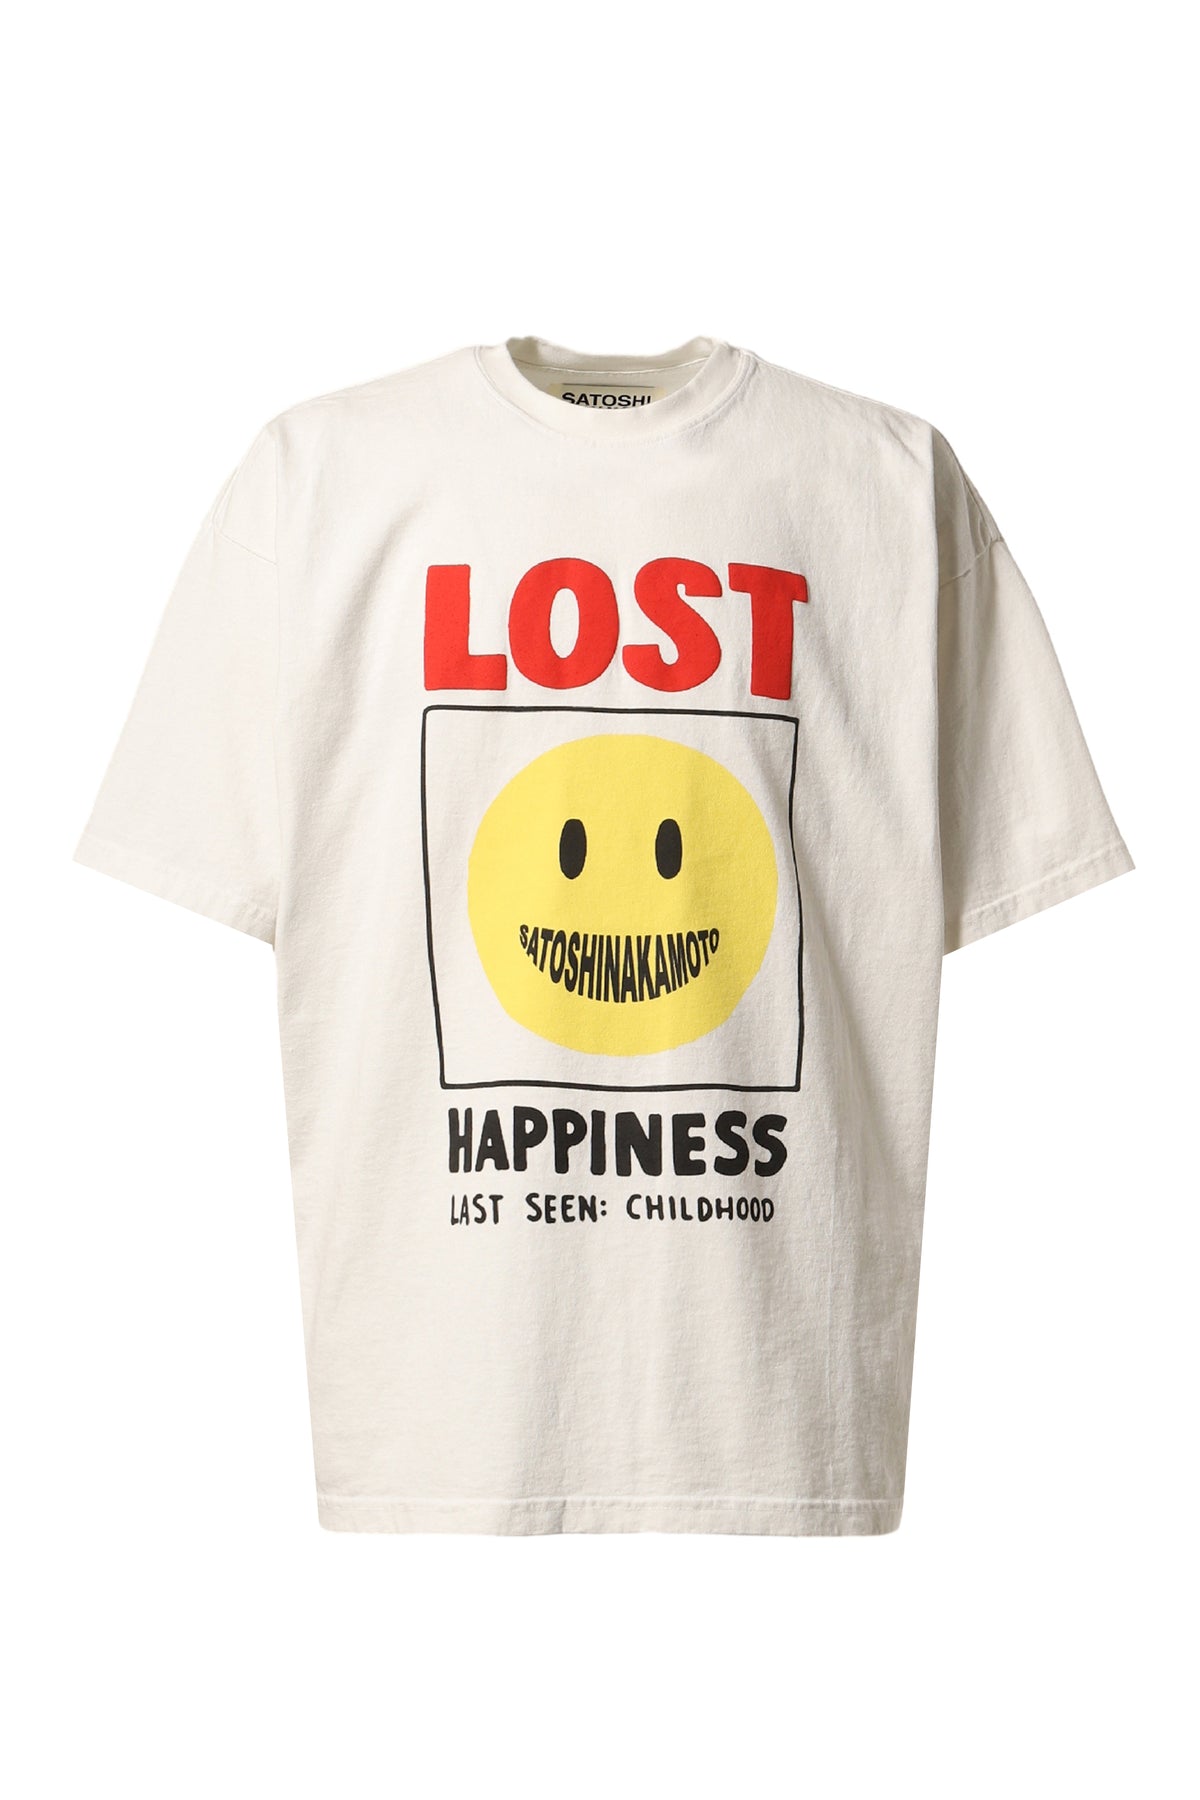 LOST HAPPINESS WHT